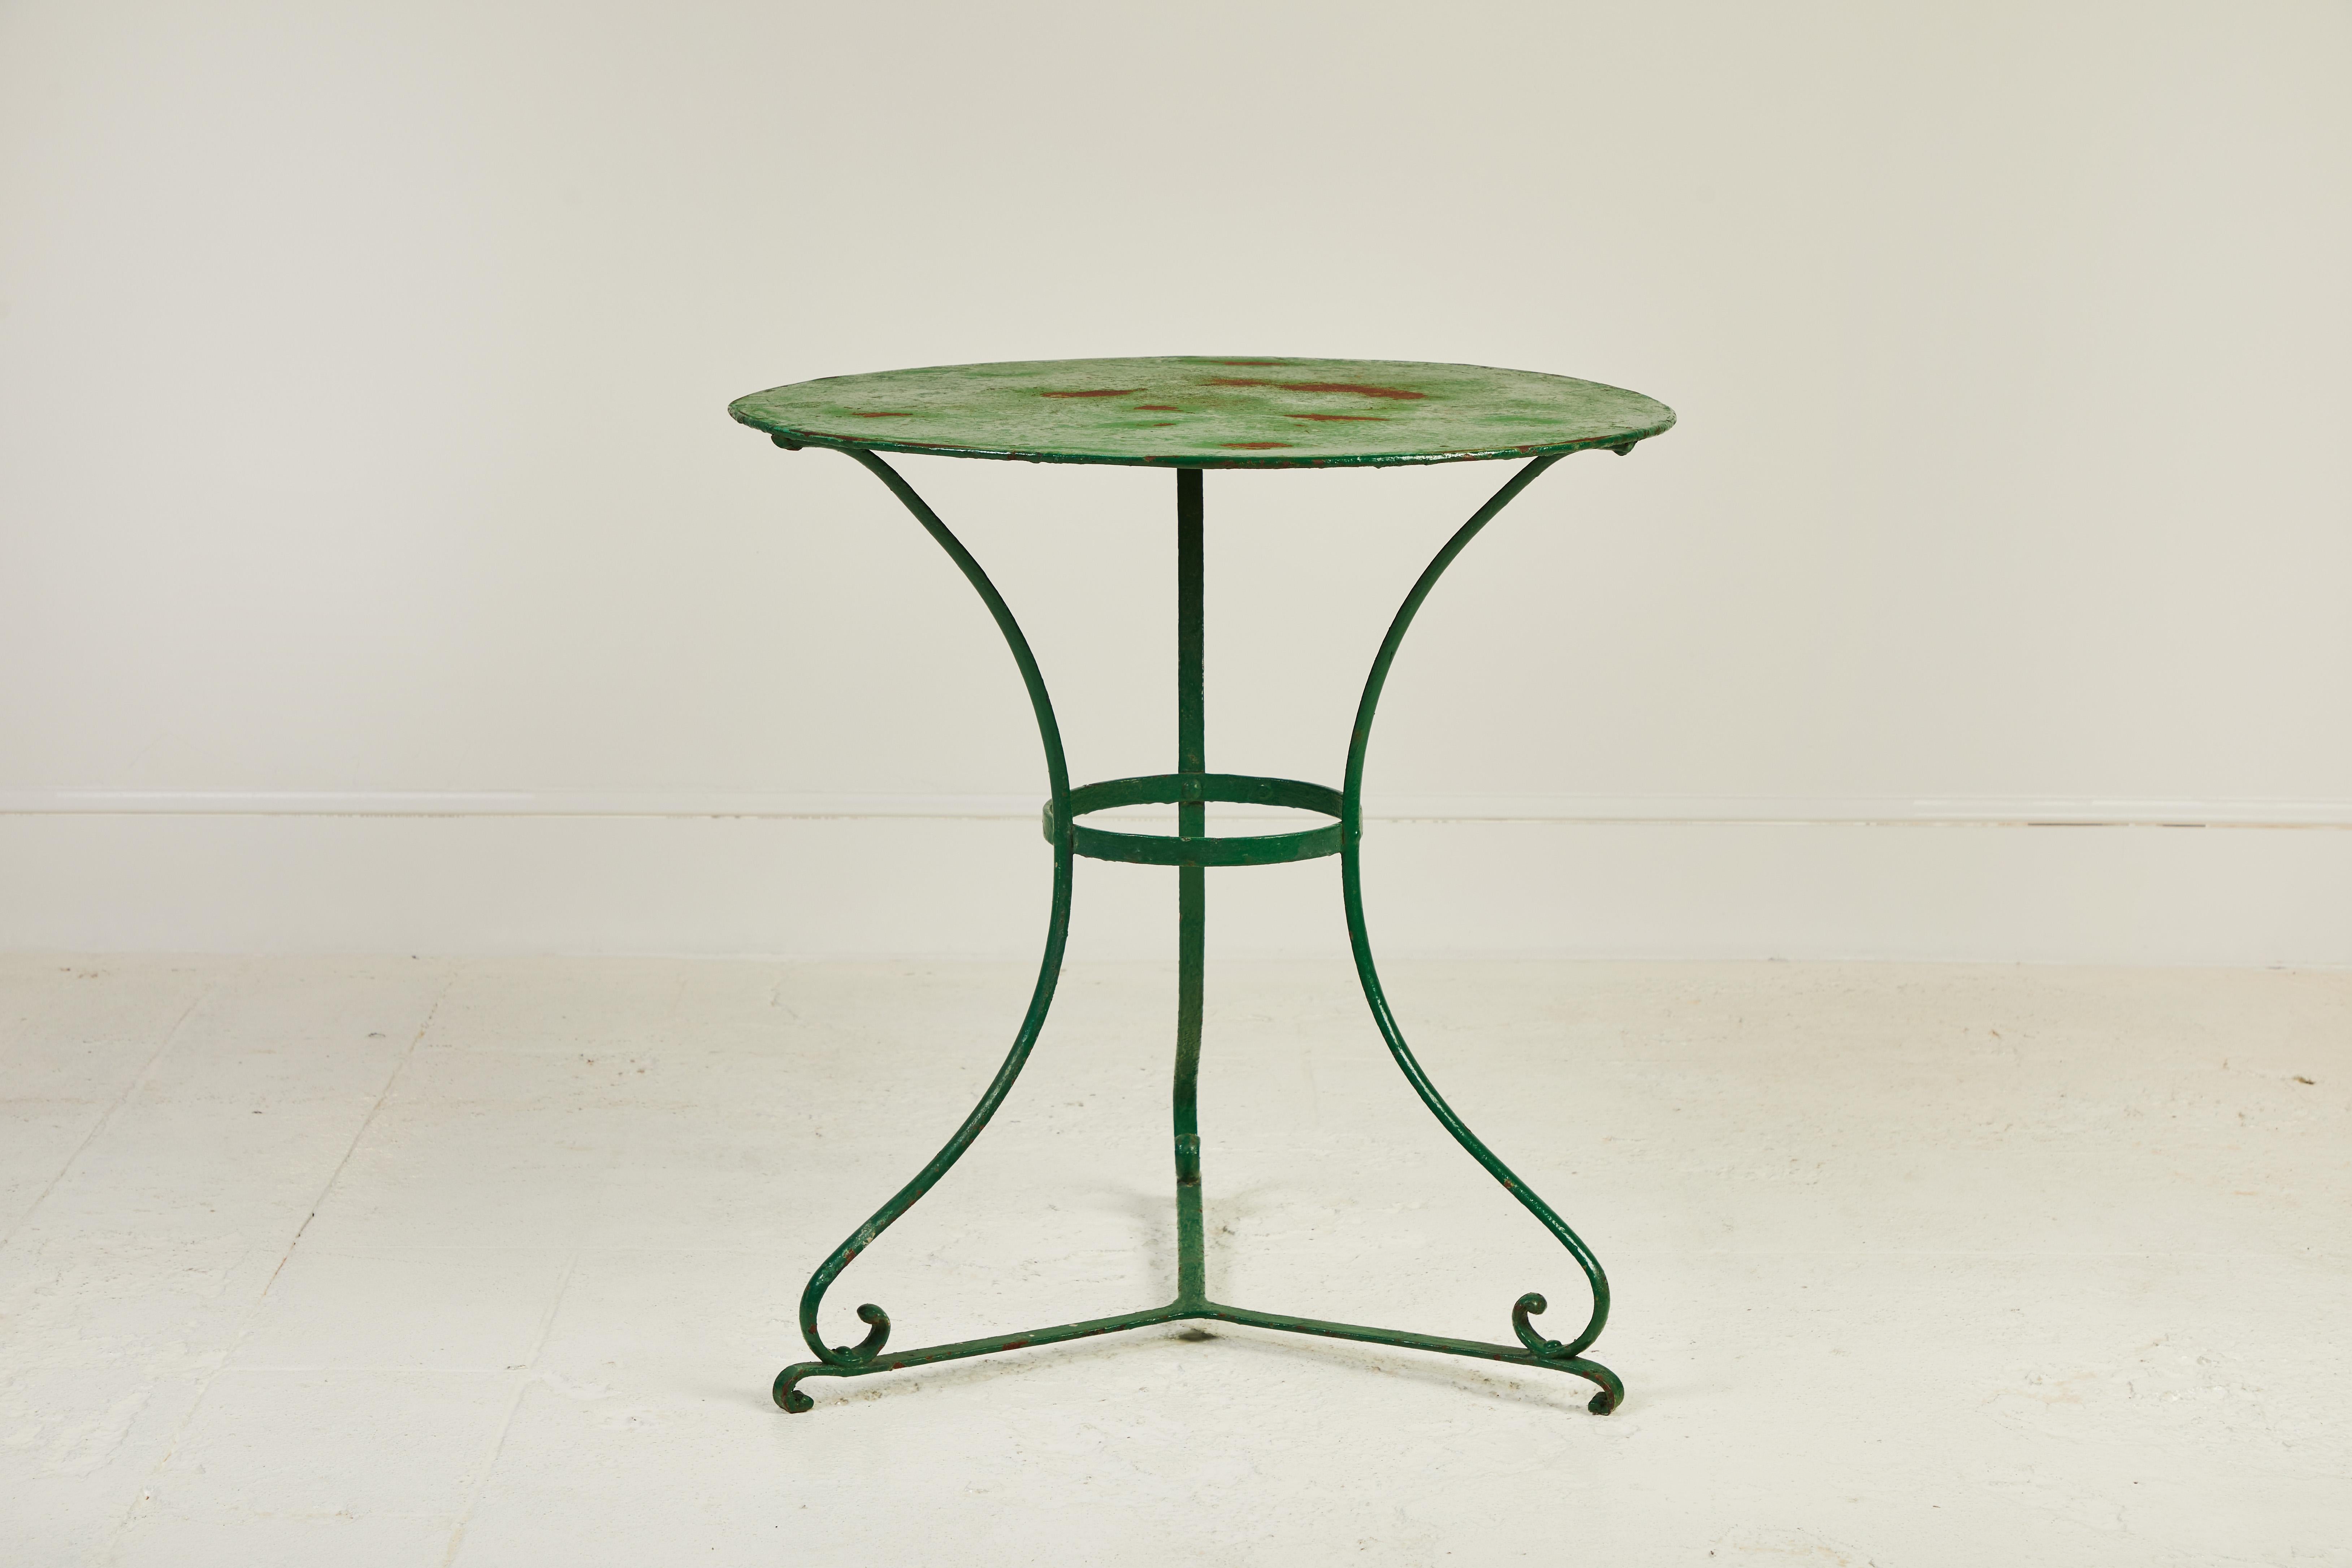 Rustic French round green metal table, the top has some beautiful age and patina. Scrolled base adds a bit of whimsy.